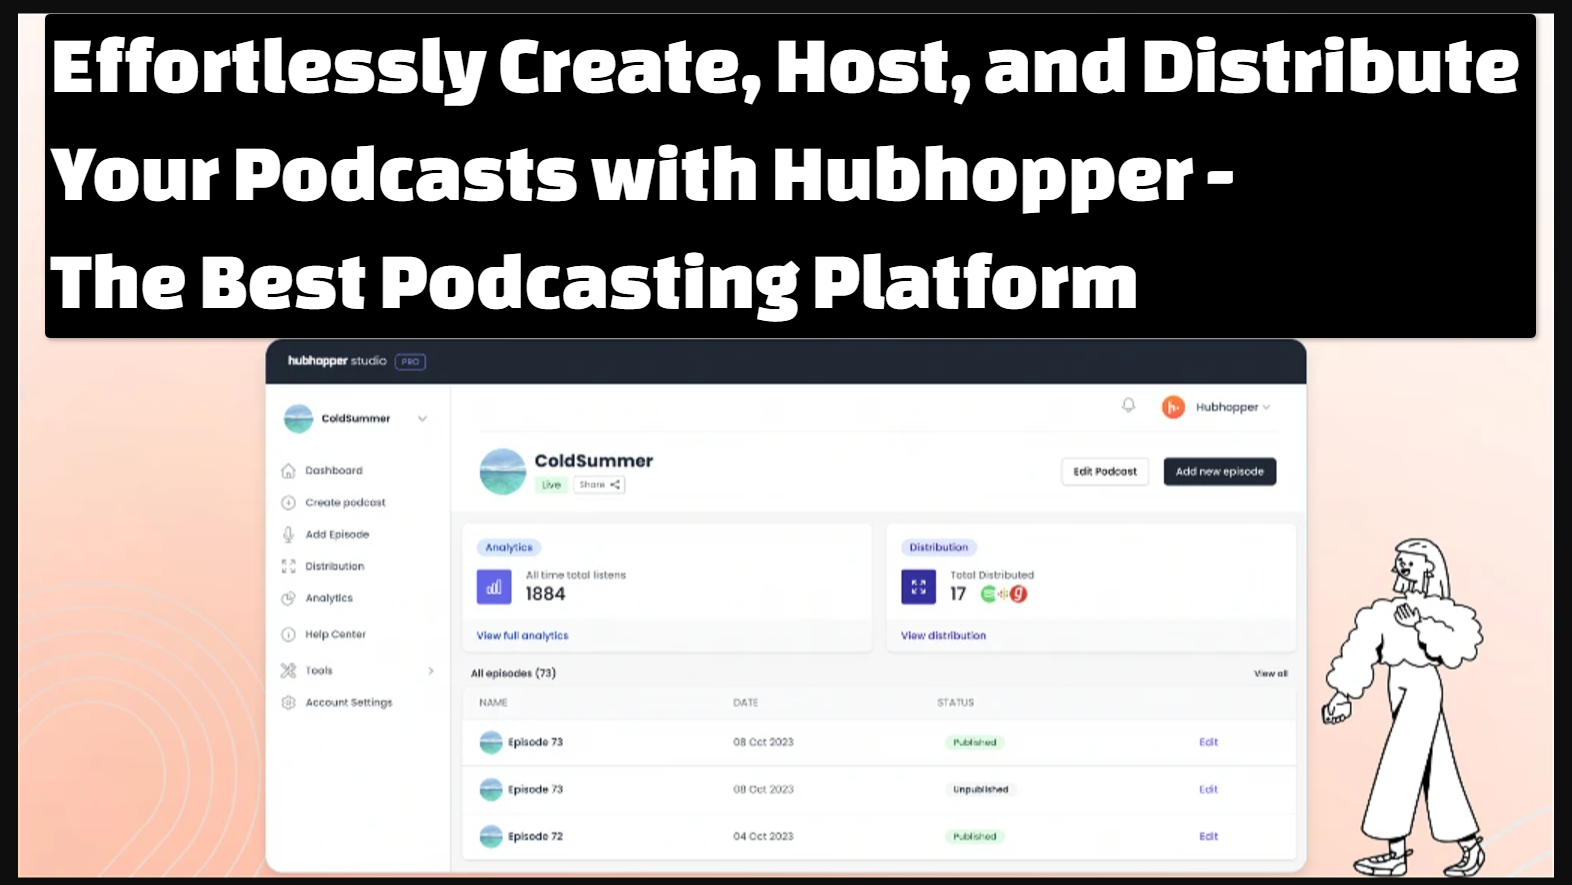 Effortlessly Create Host and Distribute Your Podcasts with Hubhopper The Best Podcasting Platform Effortlessly Create, Host, and Distribute Your Podcasts with Hubhopper - The Best Podcasting Platform